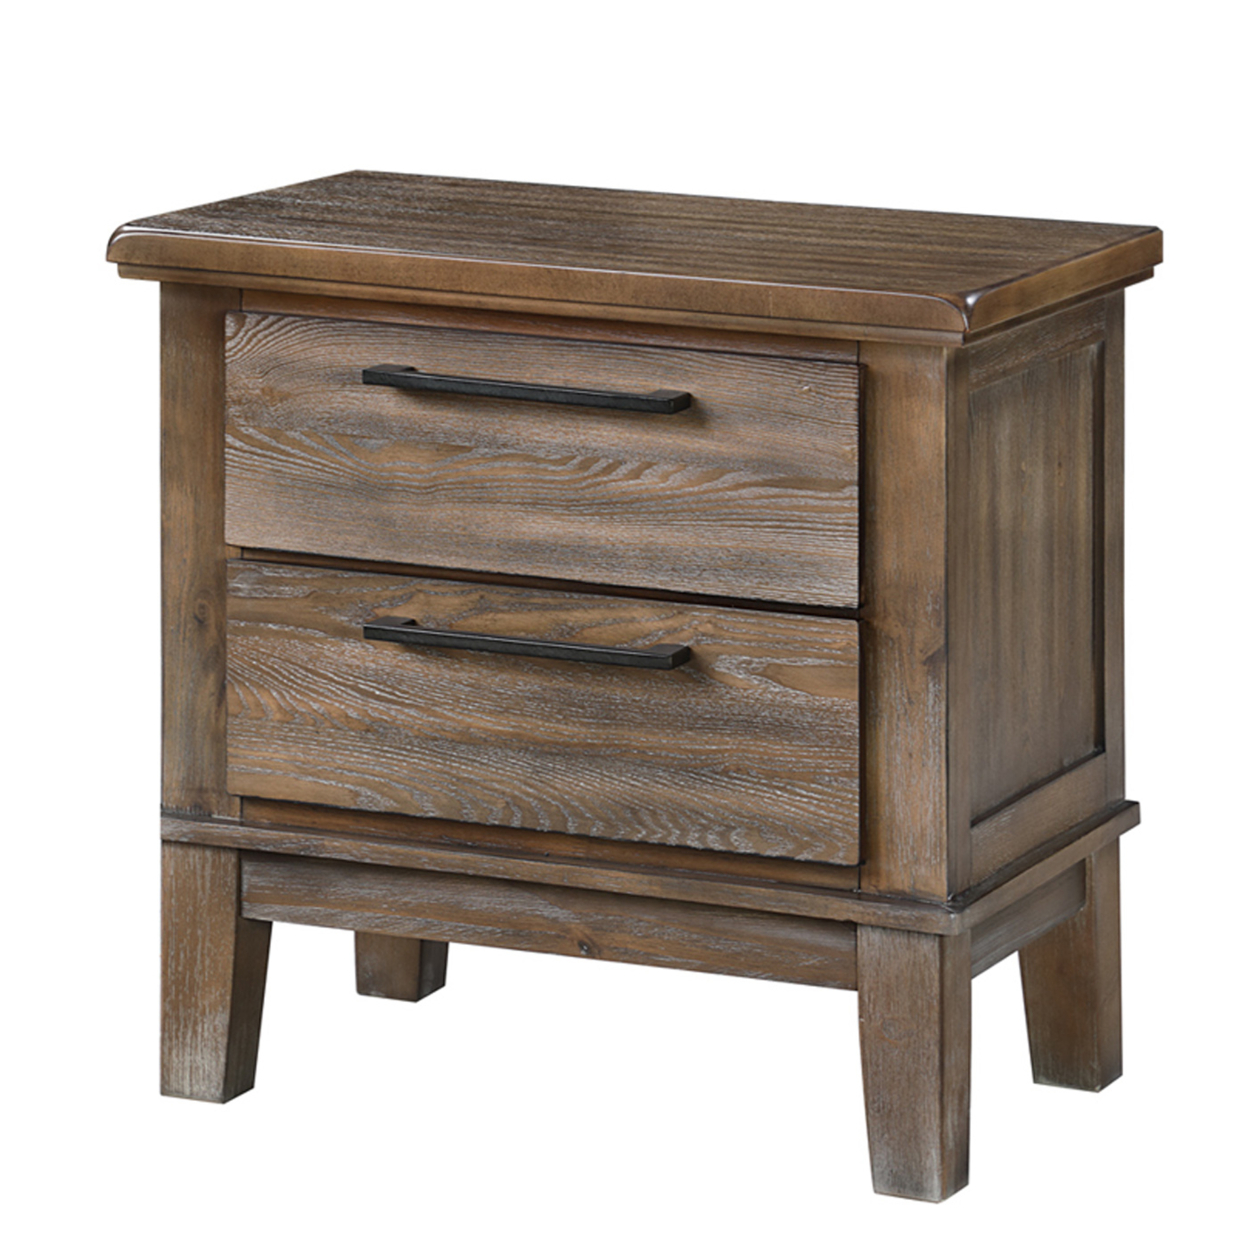 Wooden Nightstand With Chamfered Legs And 2 Spacious Drawers, Light Brown- Saltoro Sherpi